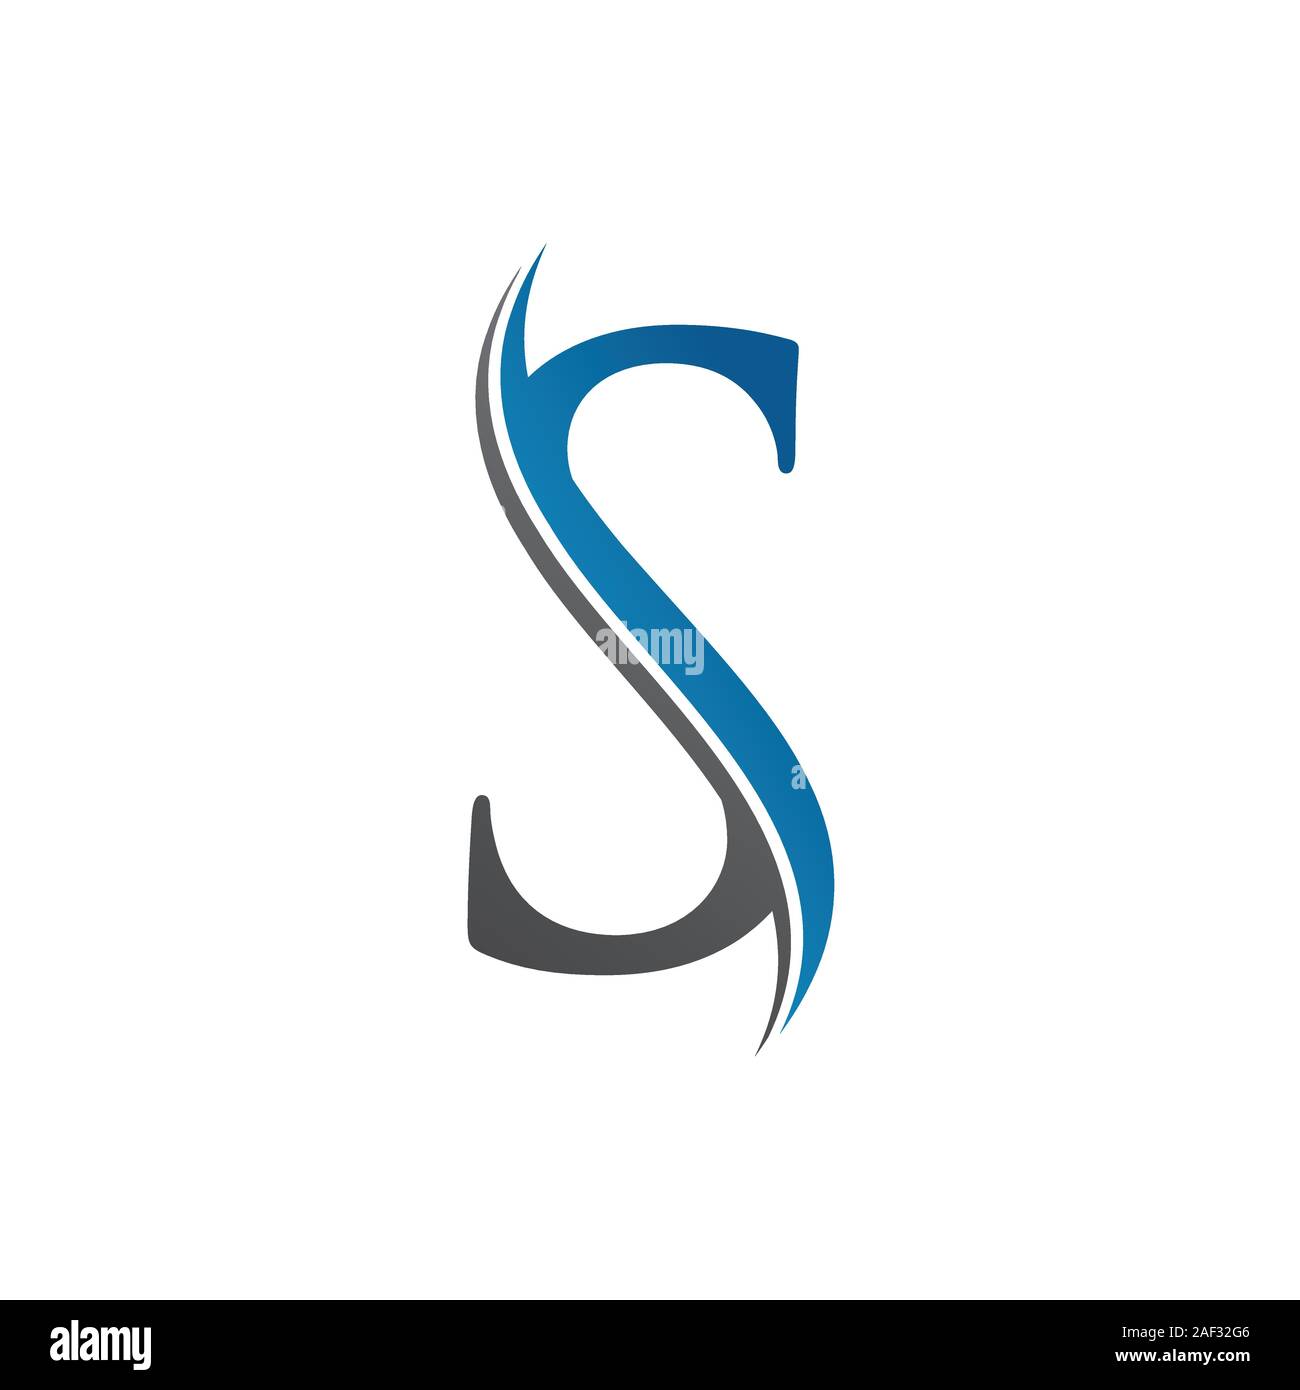 Initial Letter S Logo With Creative Modern Business Typography Vector Template. Creative Abstract Letter S Logo Vector. S Logo Design. Stock Vector